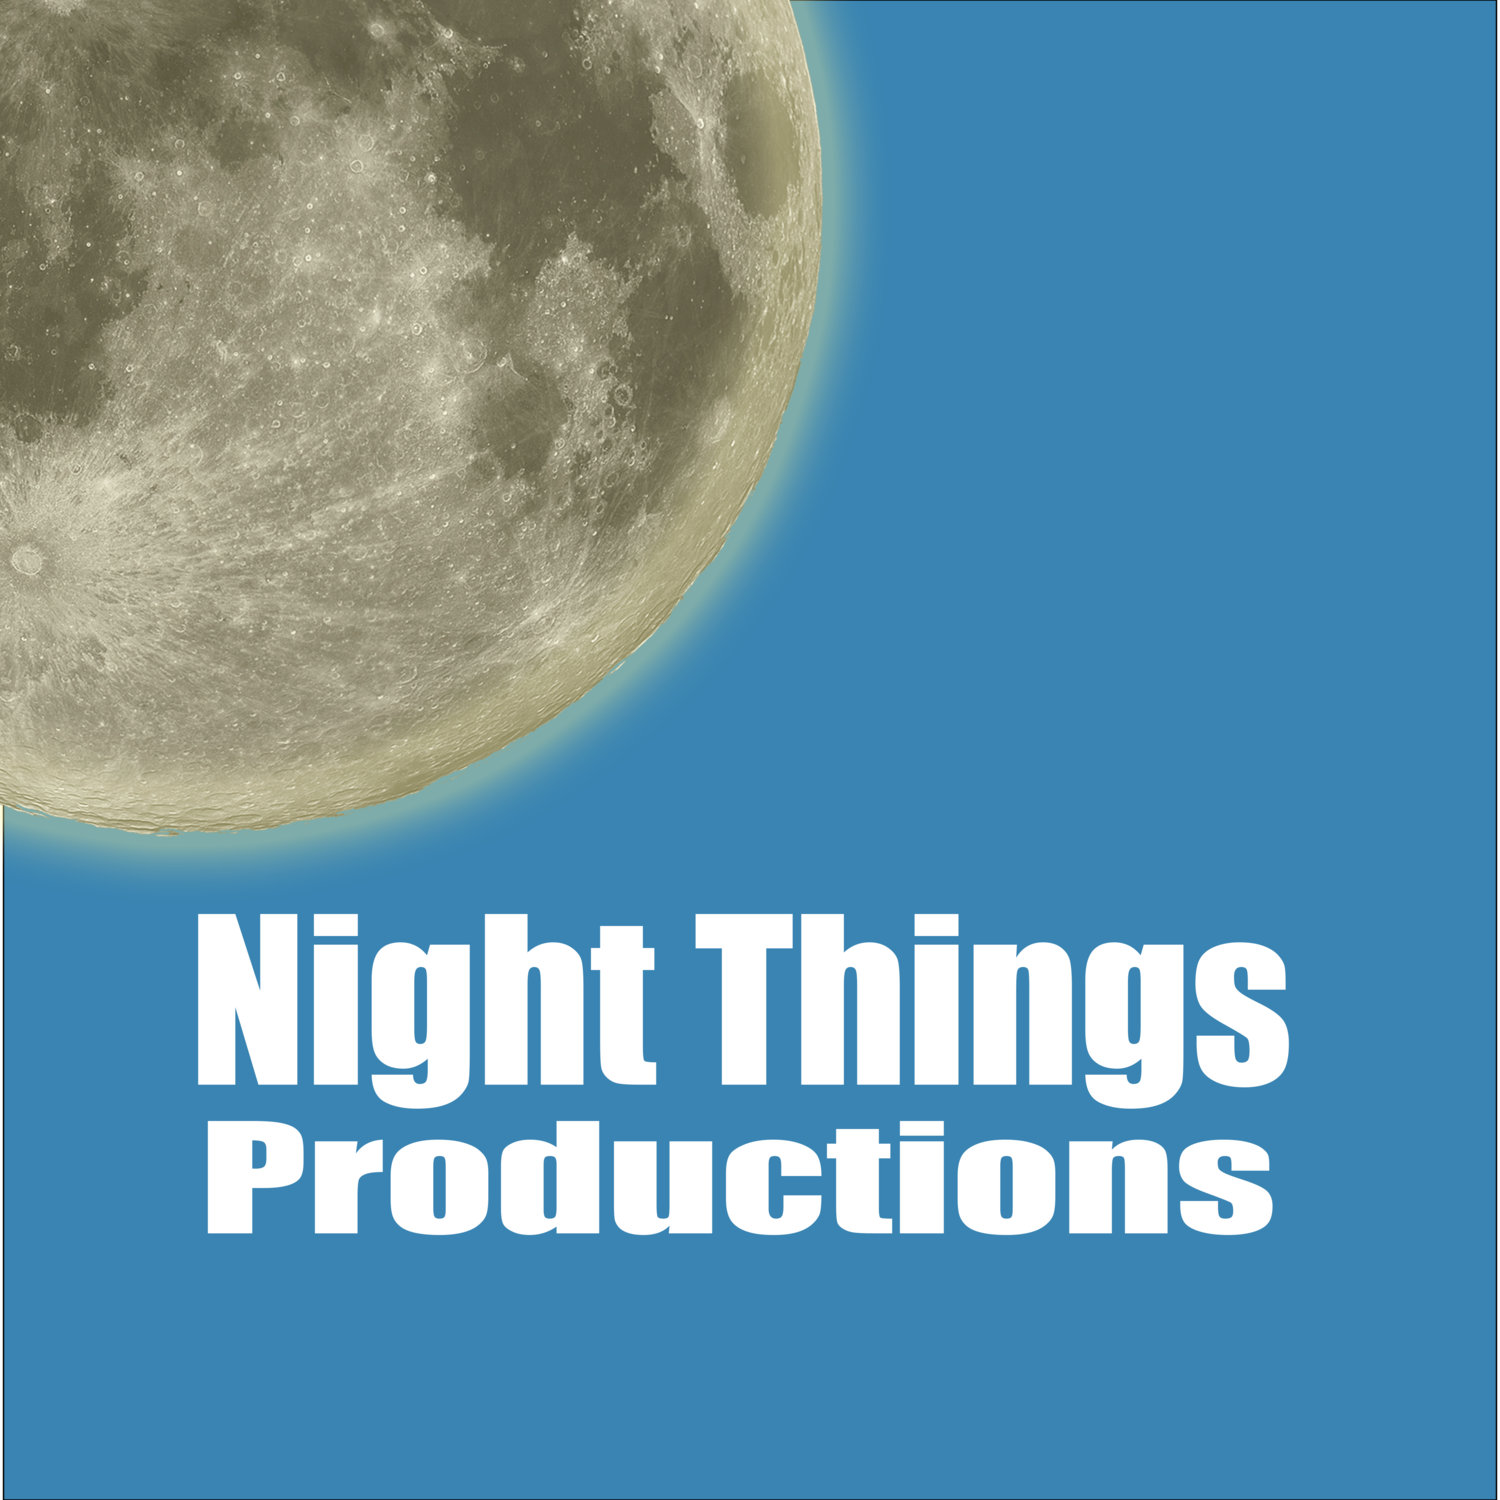 Night things Productions